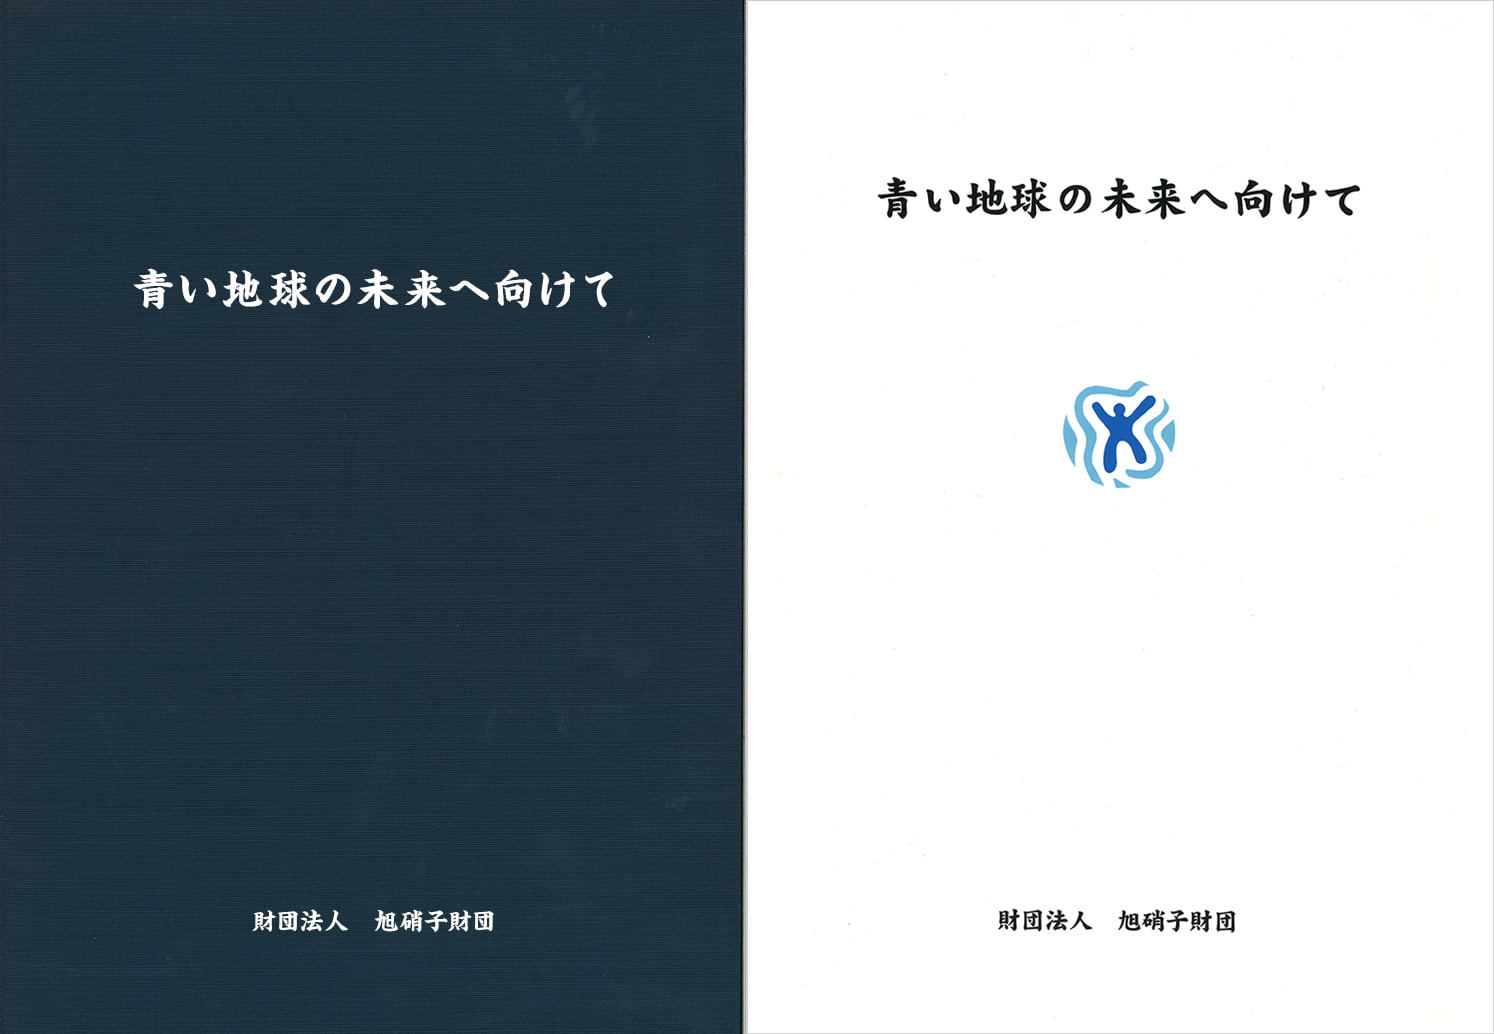 Toward the Future of the Blue Planet: A Ten-Year History of the Blue Planet (in Japanese)